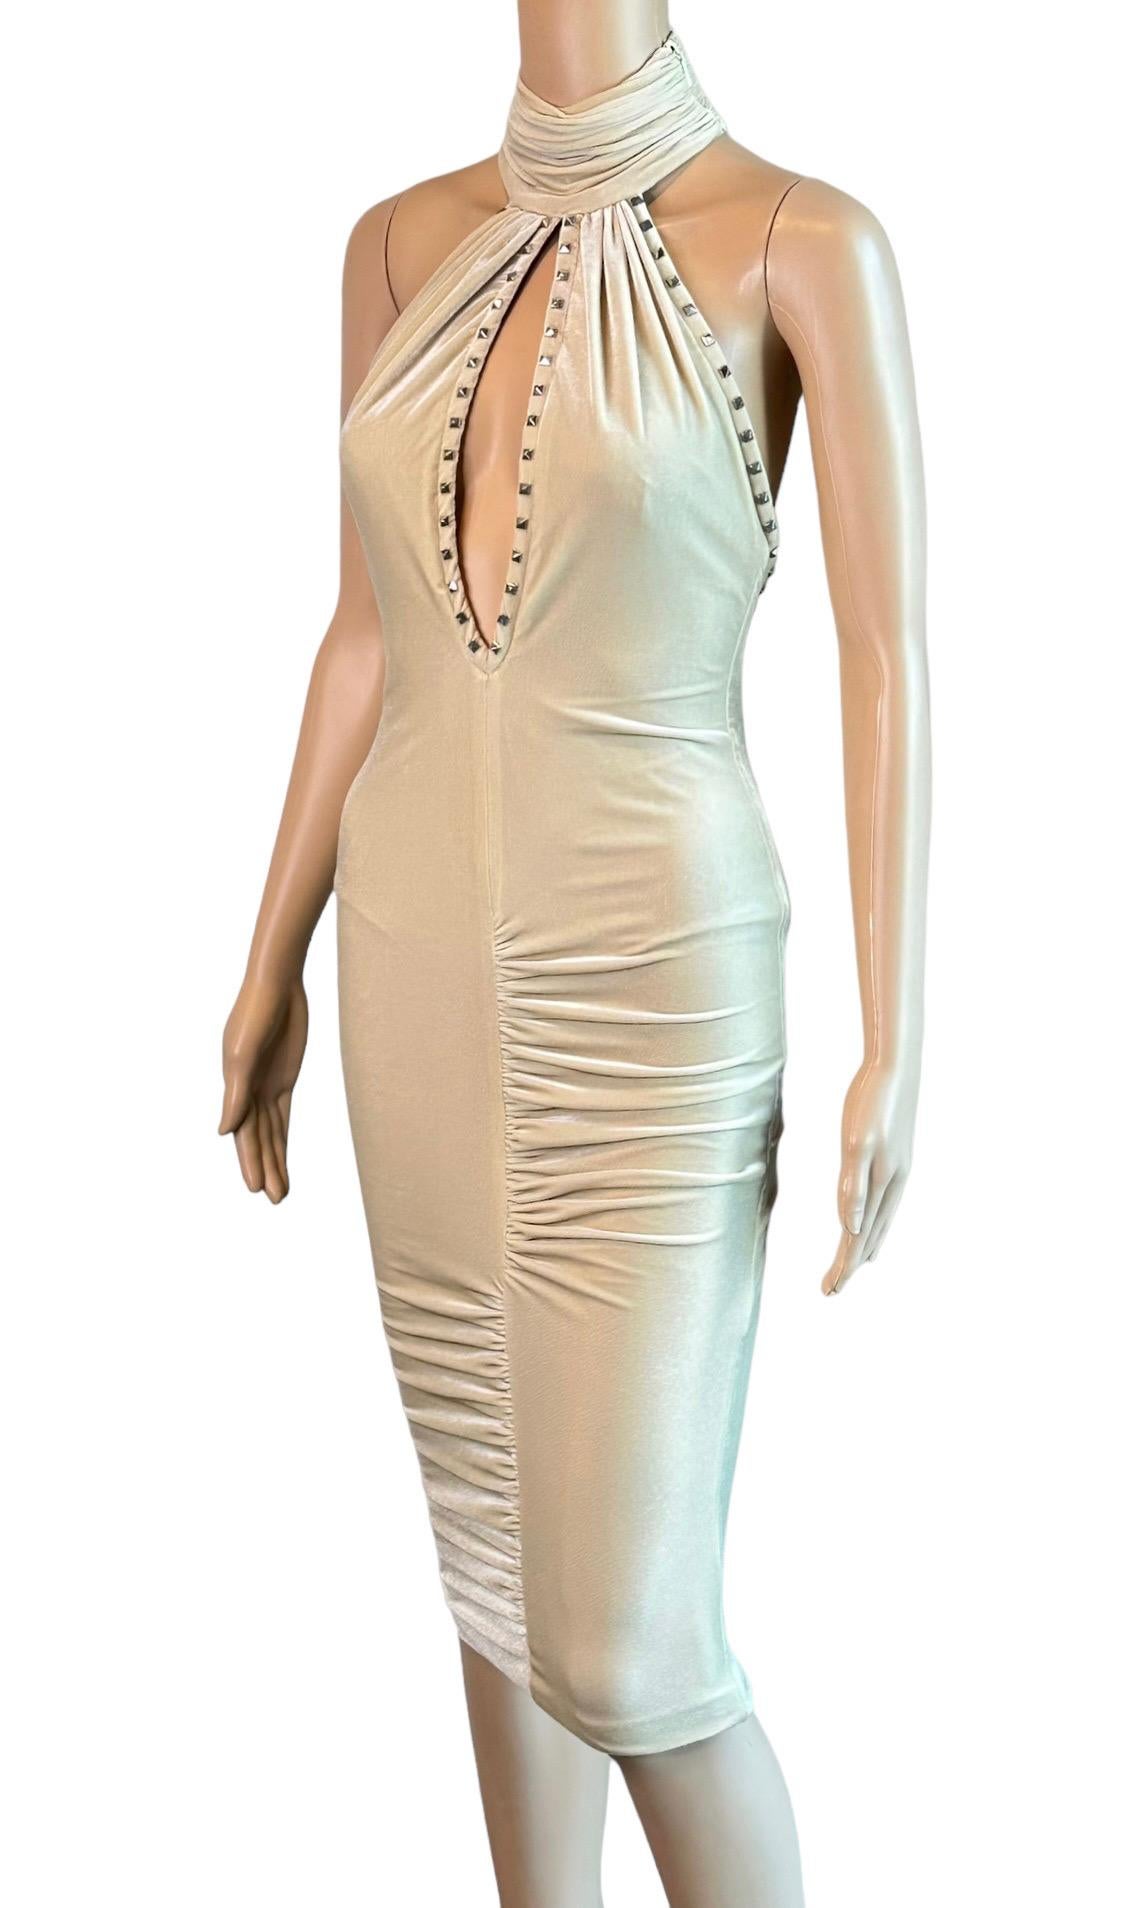 Versace F/W 2004 Runway Unworn Plunging Keyhole Cutout Back Embellished Studded Detail Dress Size IT 42

Condition: New with Tags

Look 45 from the Fall 2004 Collection.




